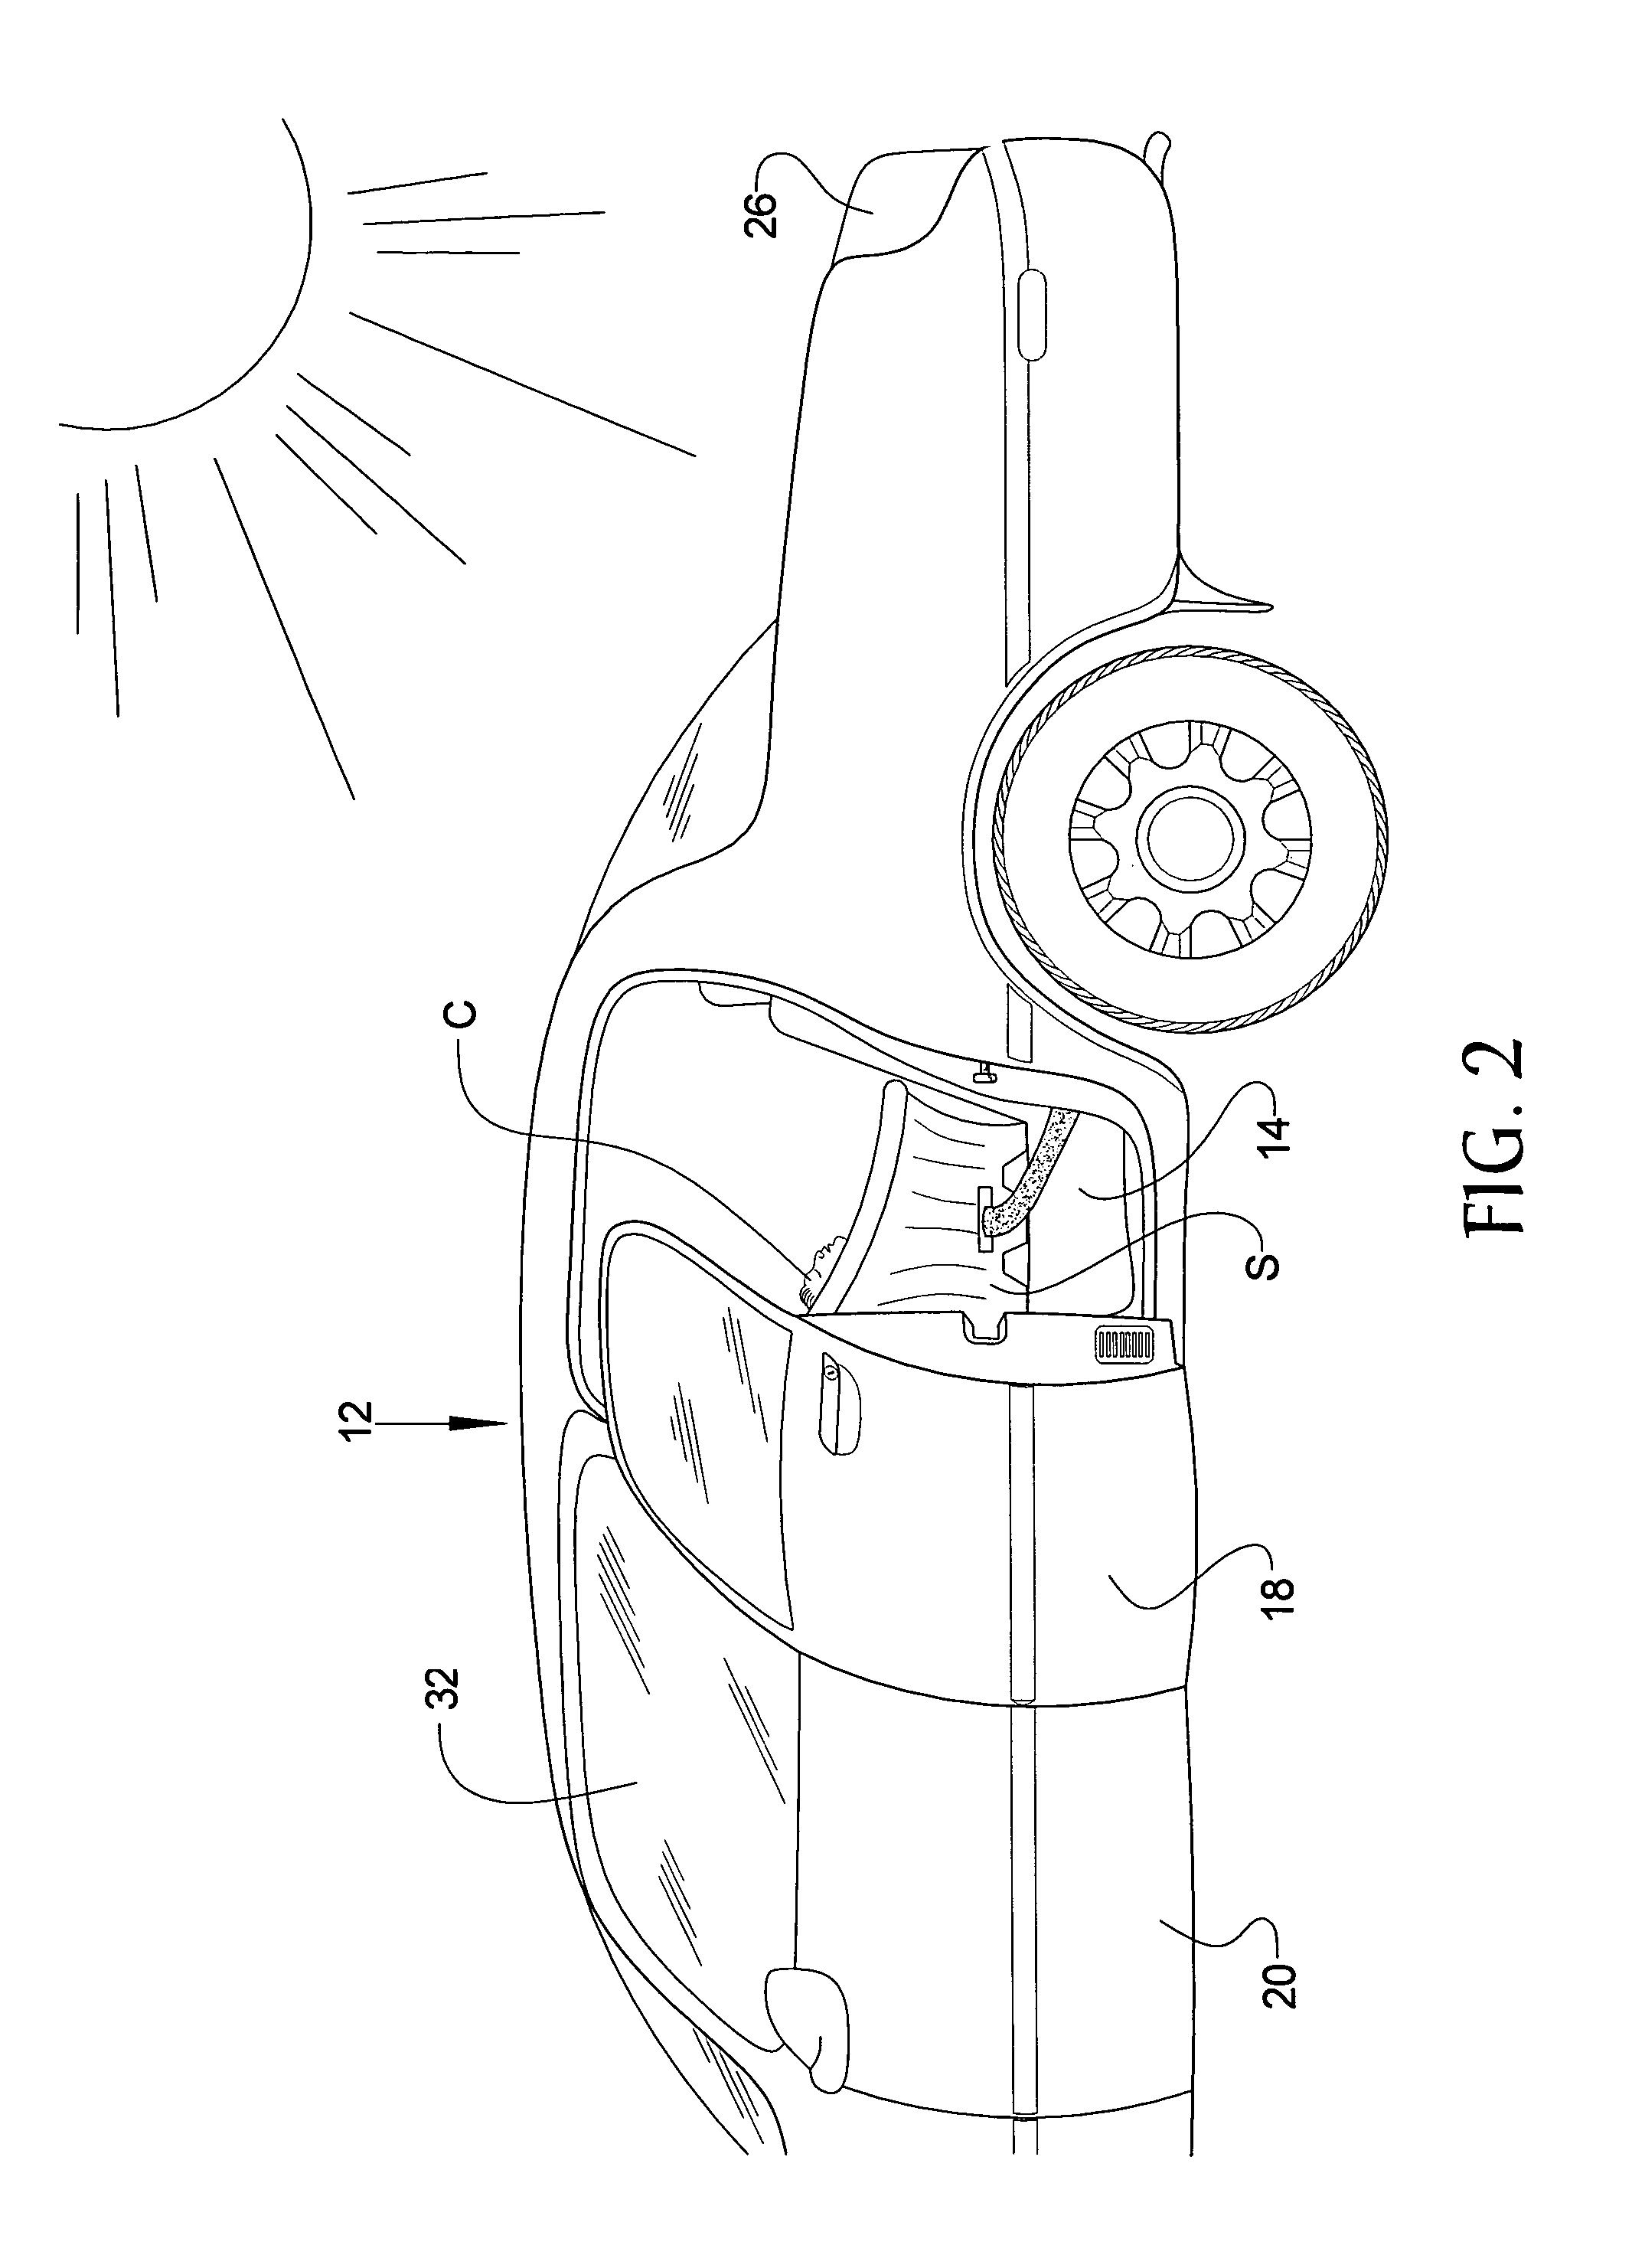 System to detect the presence of an unattended child in a vehicle